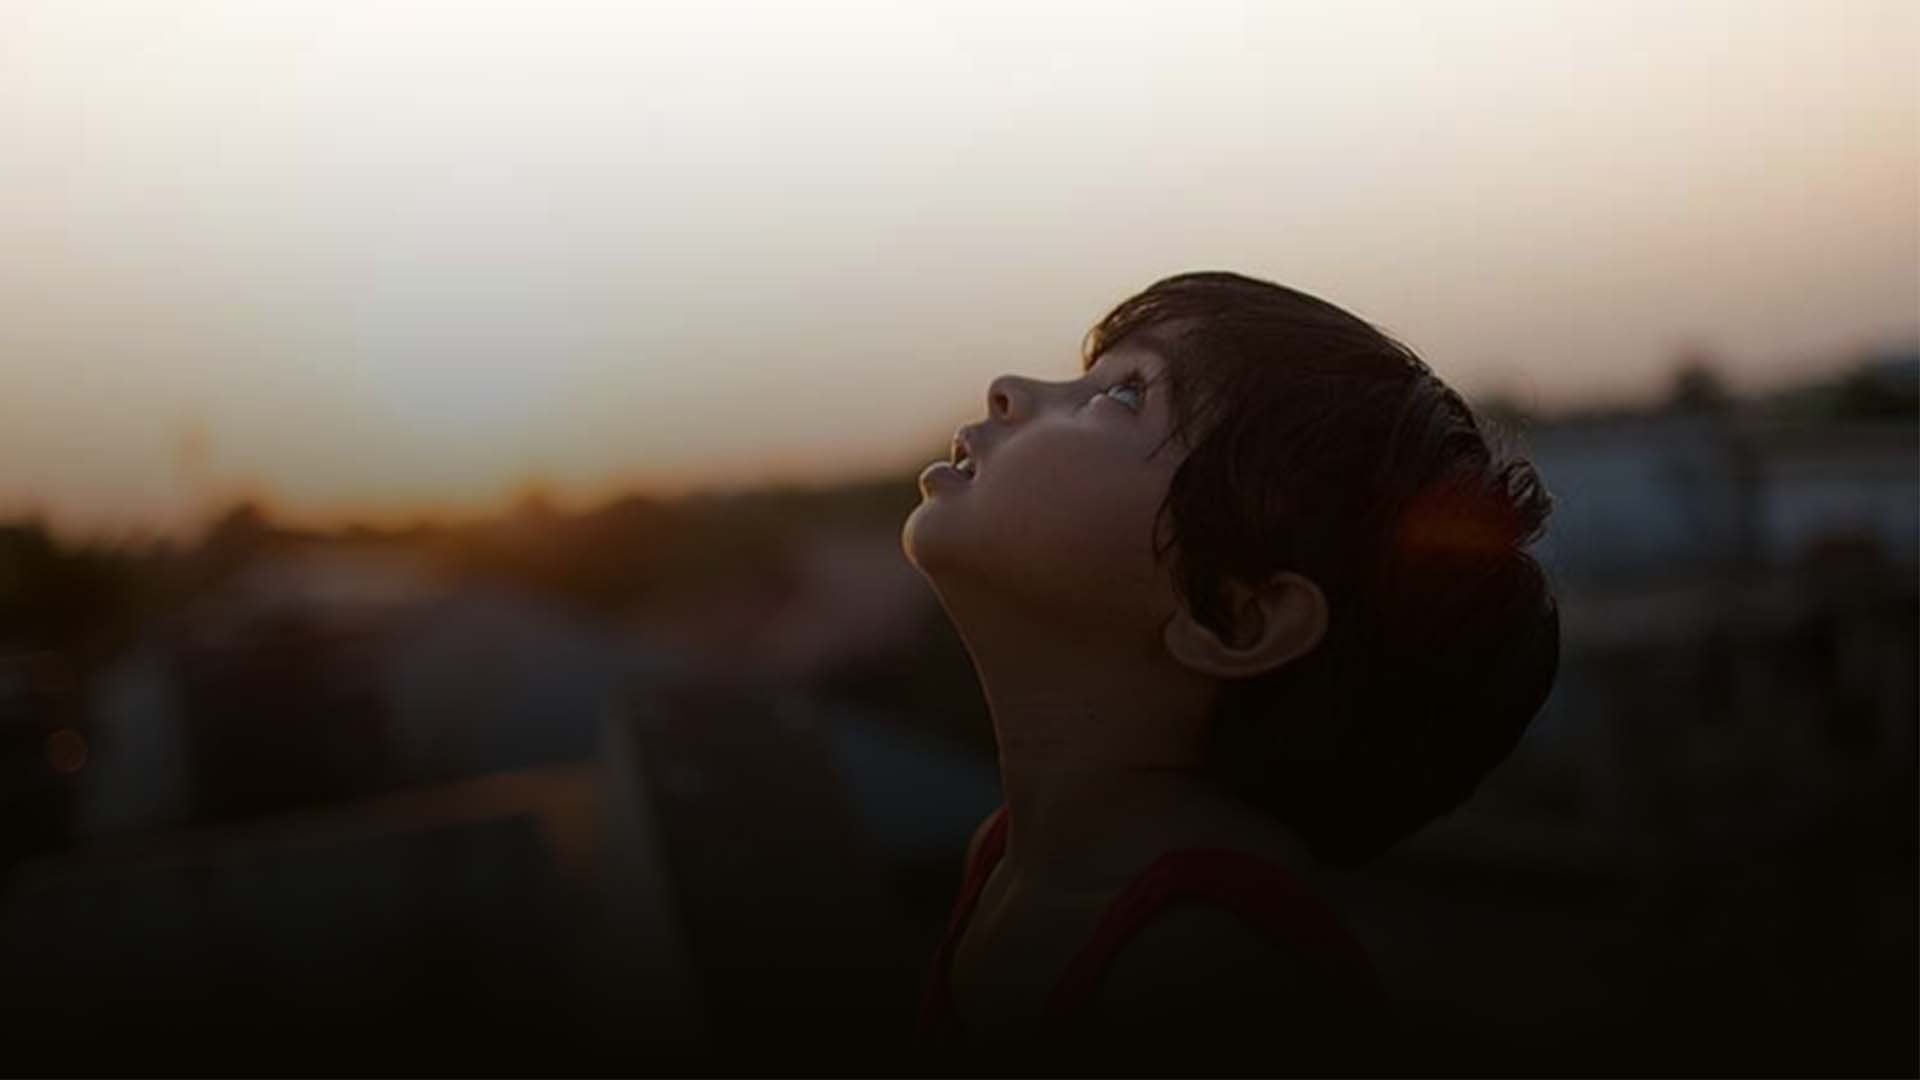 The head and shoulders of a small child in a red vest with short brown hair. The light suggests that the sun is setting. They have their head raised and are looking skywards